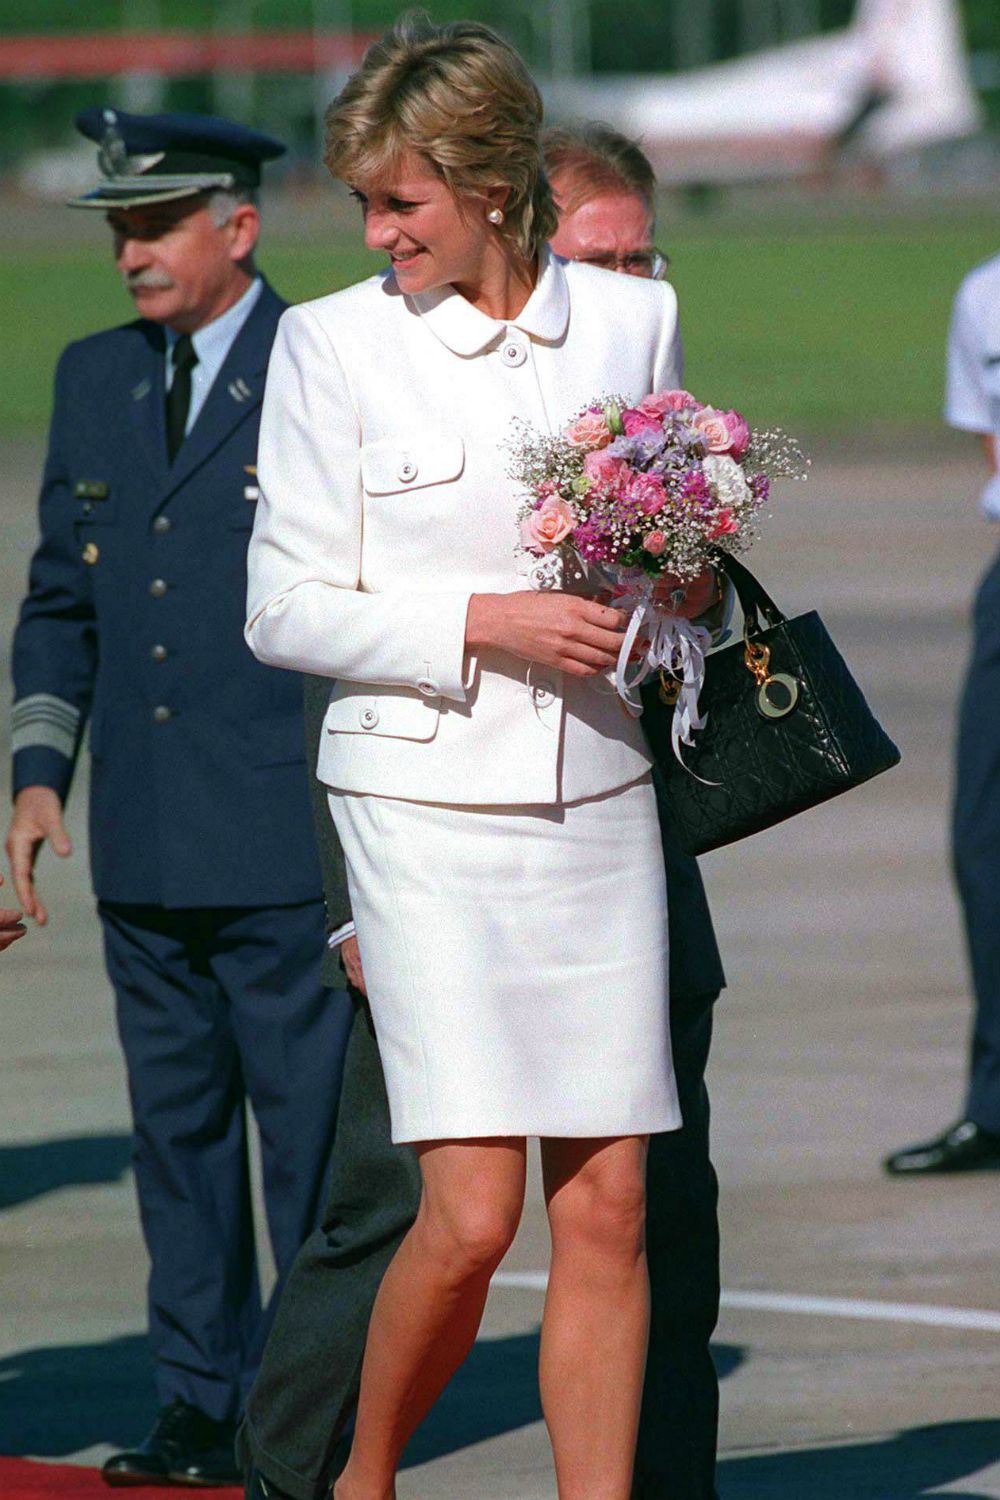 Princess Diana with flowers, wearing a white suit